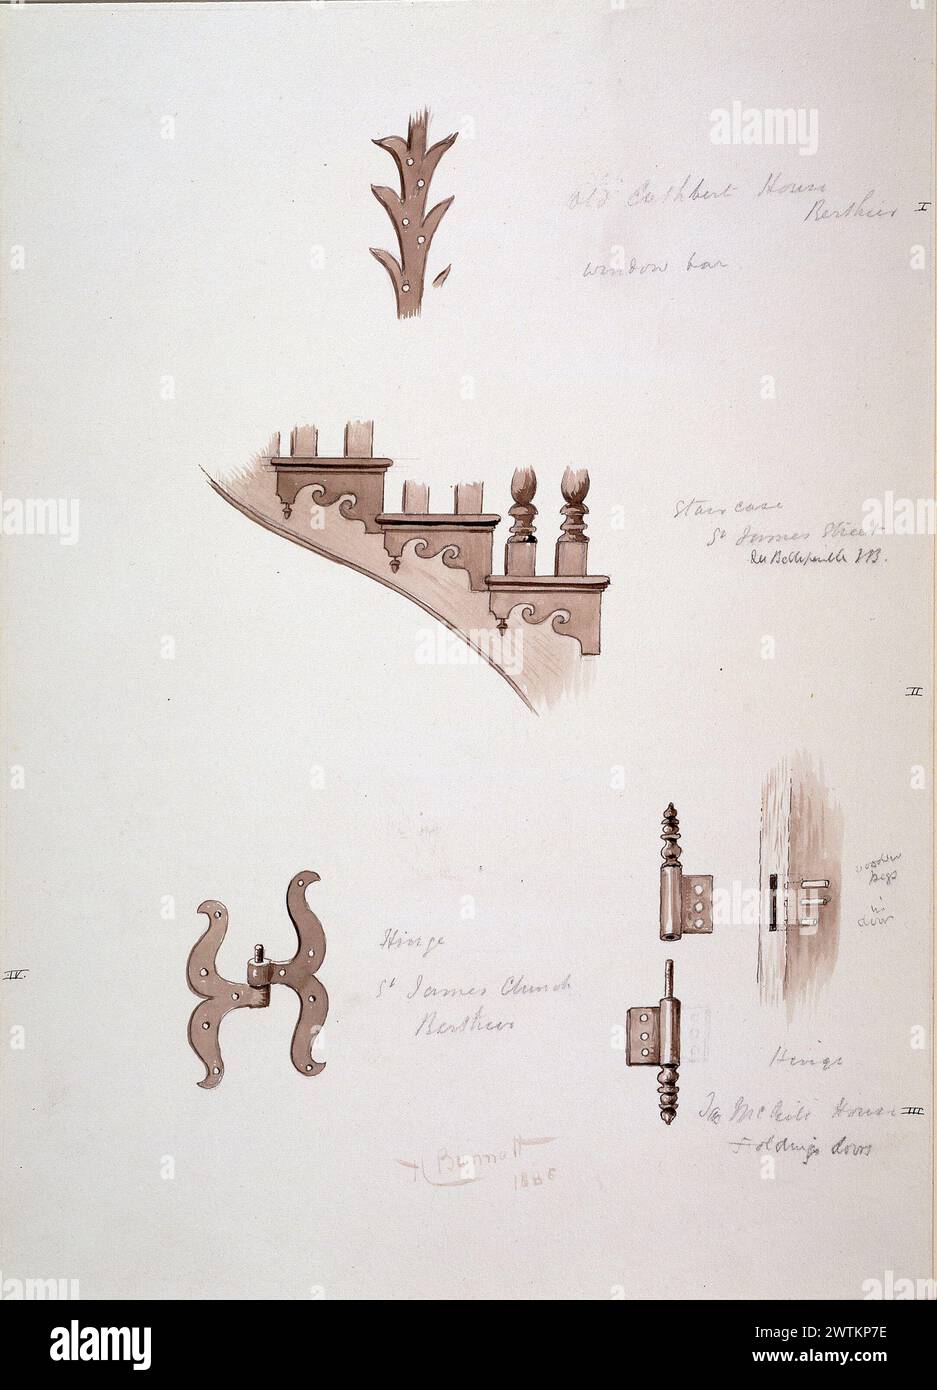 Drawing - Details of domestic architecture Henry Richard S. Bunnett (1845-1910) Stock Photo